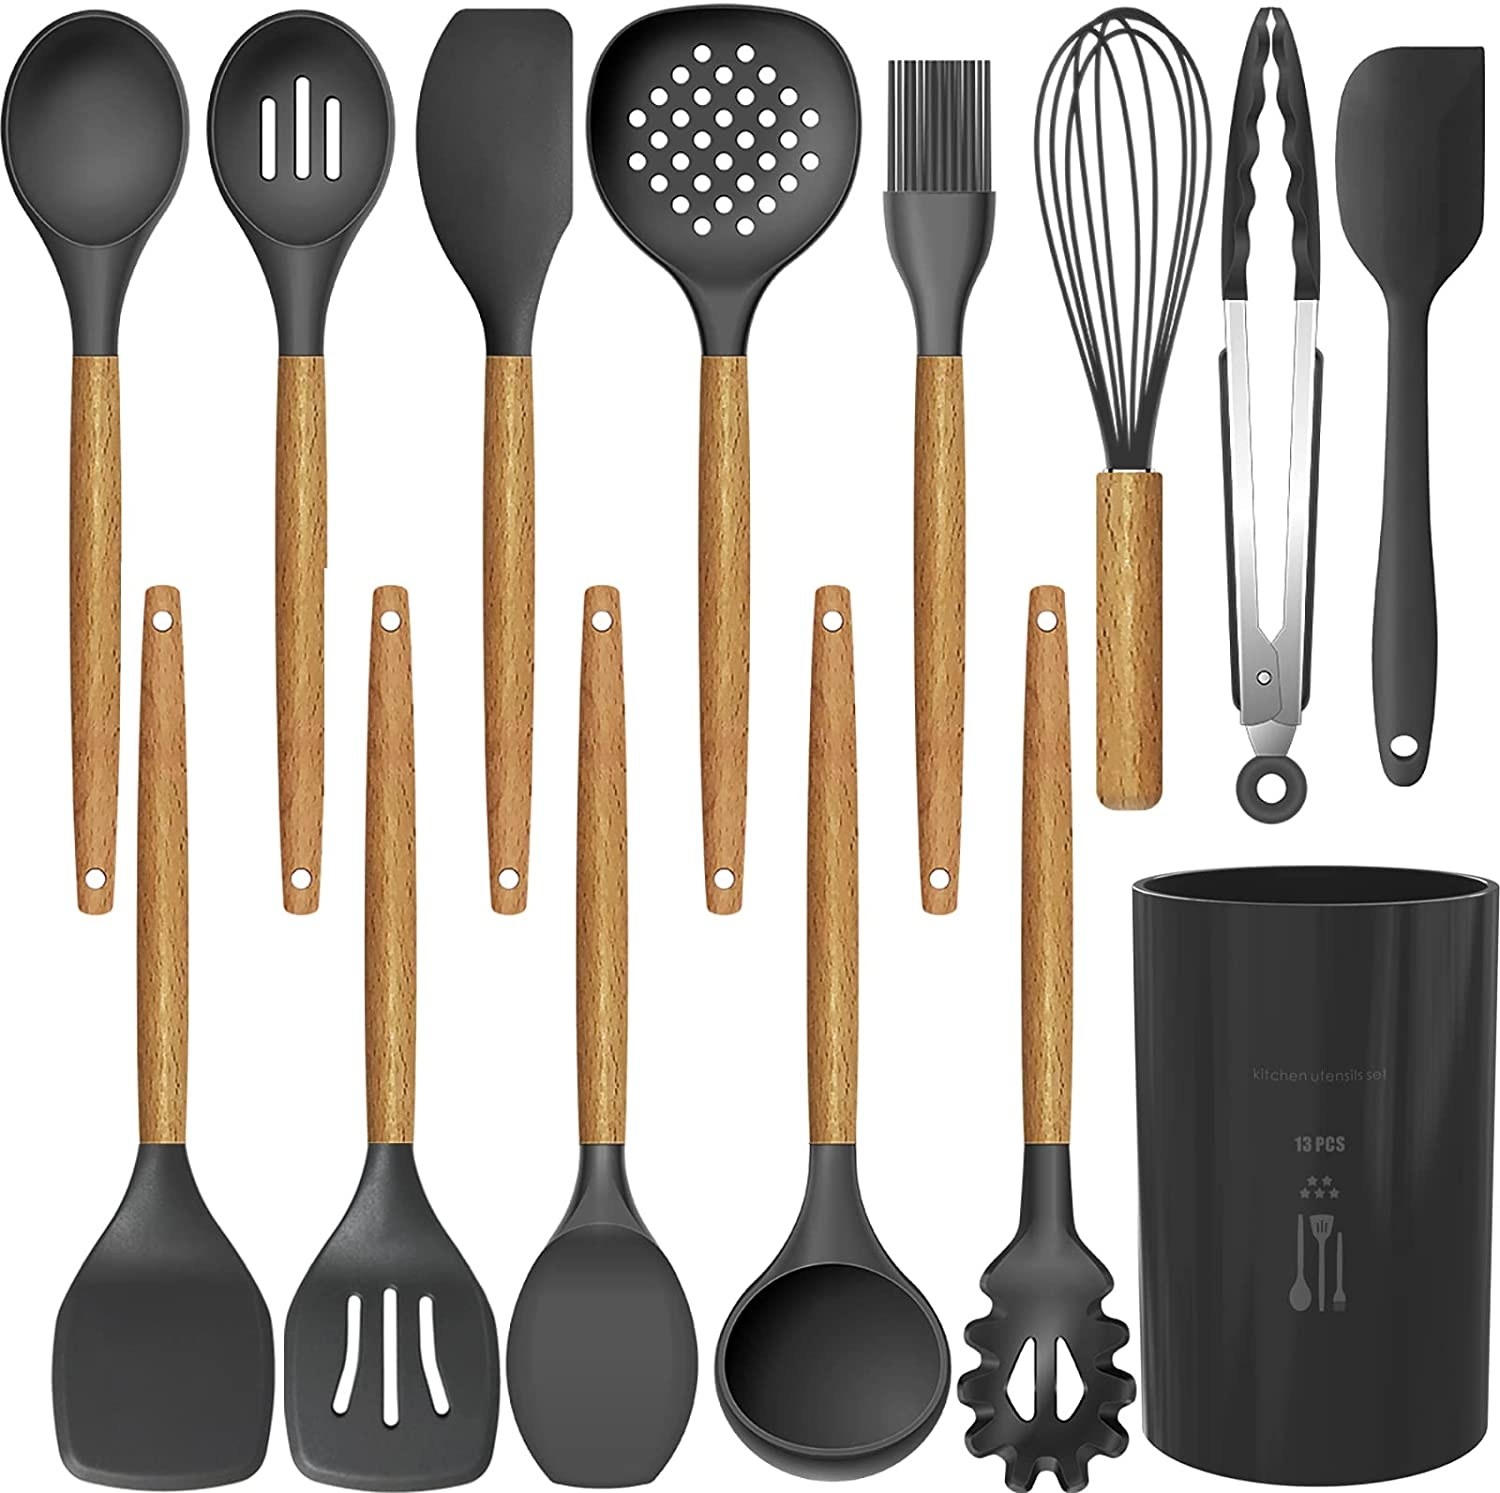 the 14 piece cooking utensil set